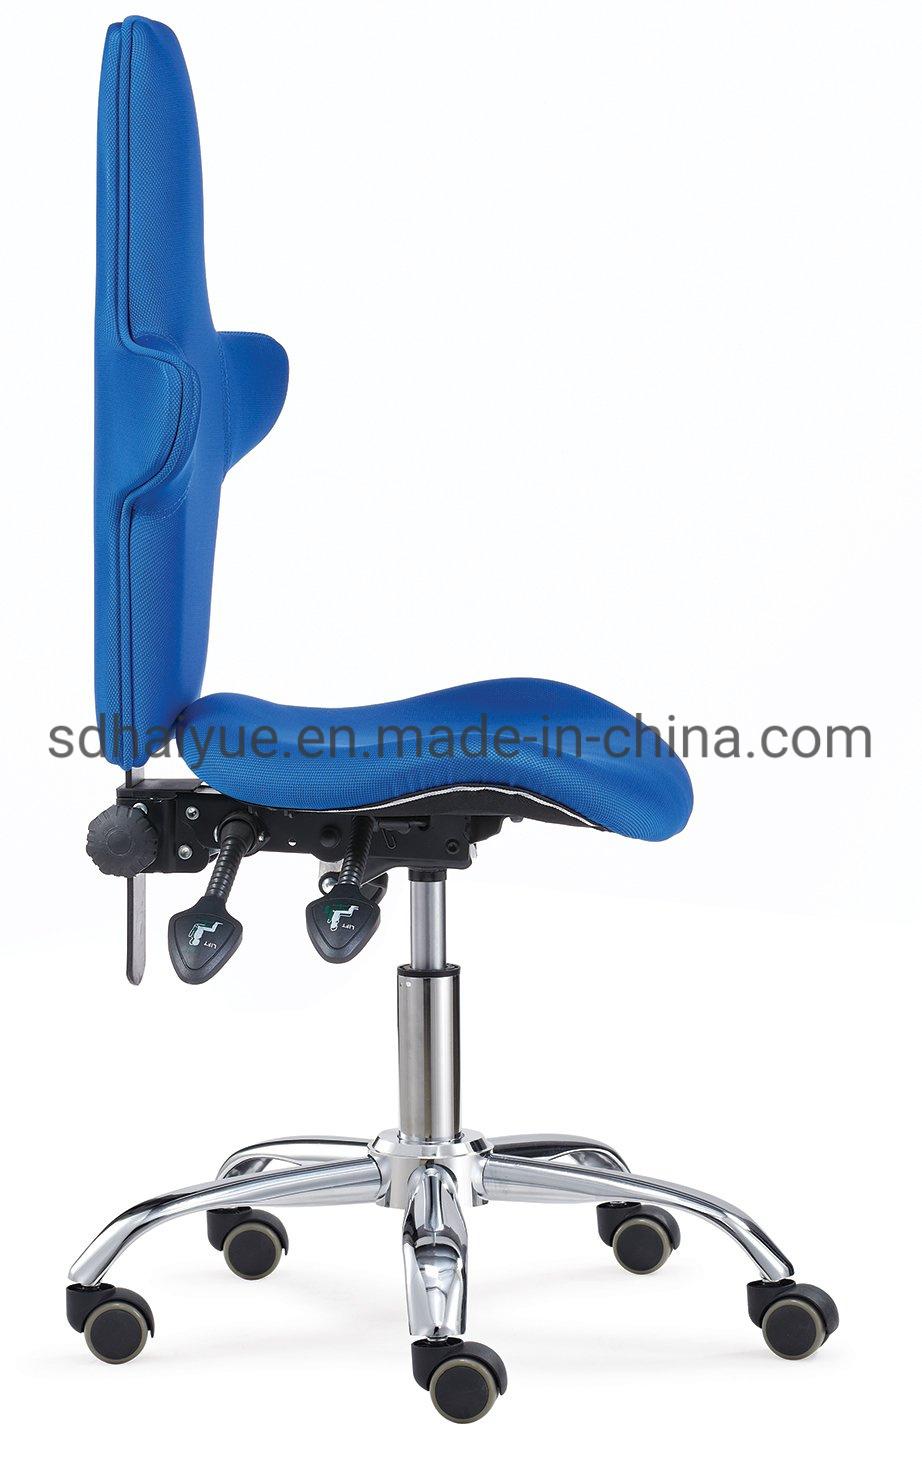 Fabric Ergonomic Adjustable Office Chair with High Backrest